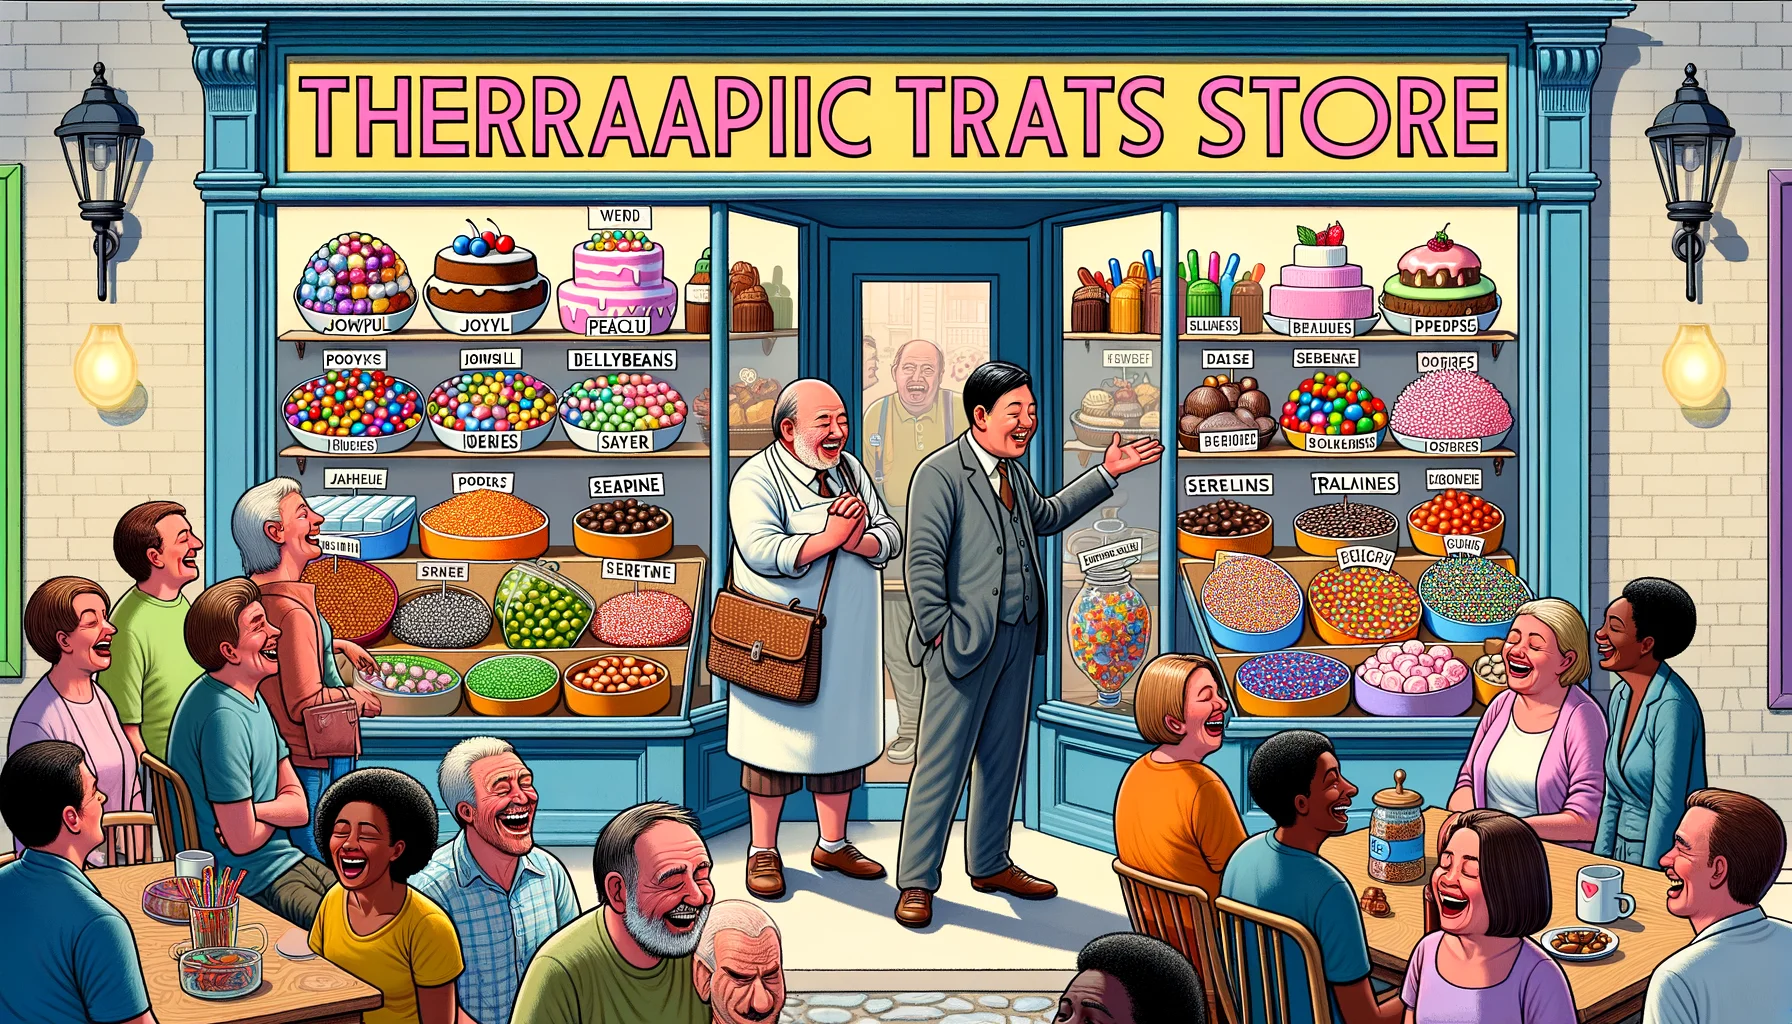 Depict a humorous yet realistic scenario, where different kinds of sweets are presented as having mood-stabilizing ingredients. Imagine a candy shop full of customers with a large display of cheerily branded sweets such as 'Joyful Jellybeans’, ‘Peaceful Pralines’, ‘Serene Sugars', etc. There's an array of colourful cakes, candies, and chocolates, all humorously labeled with mood-stabilizing terms. The shopkeeper, an older man of Asian descent, is explaining the 'powers' of these sweets to a diverse crowd of laughing customers, including a black middle-aged woman and a young Hispanic man. The storefront has a large, vibrant sign proclaiming it as the 'Therapeutic Treats Store'.